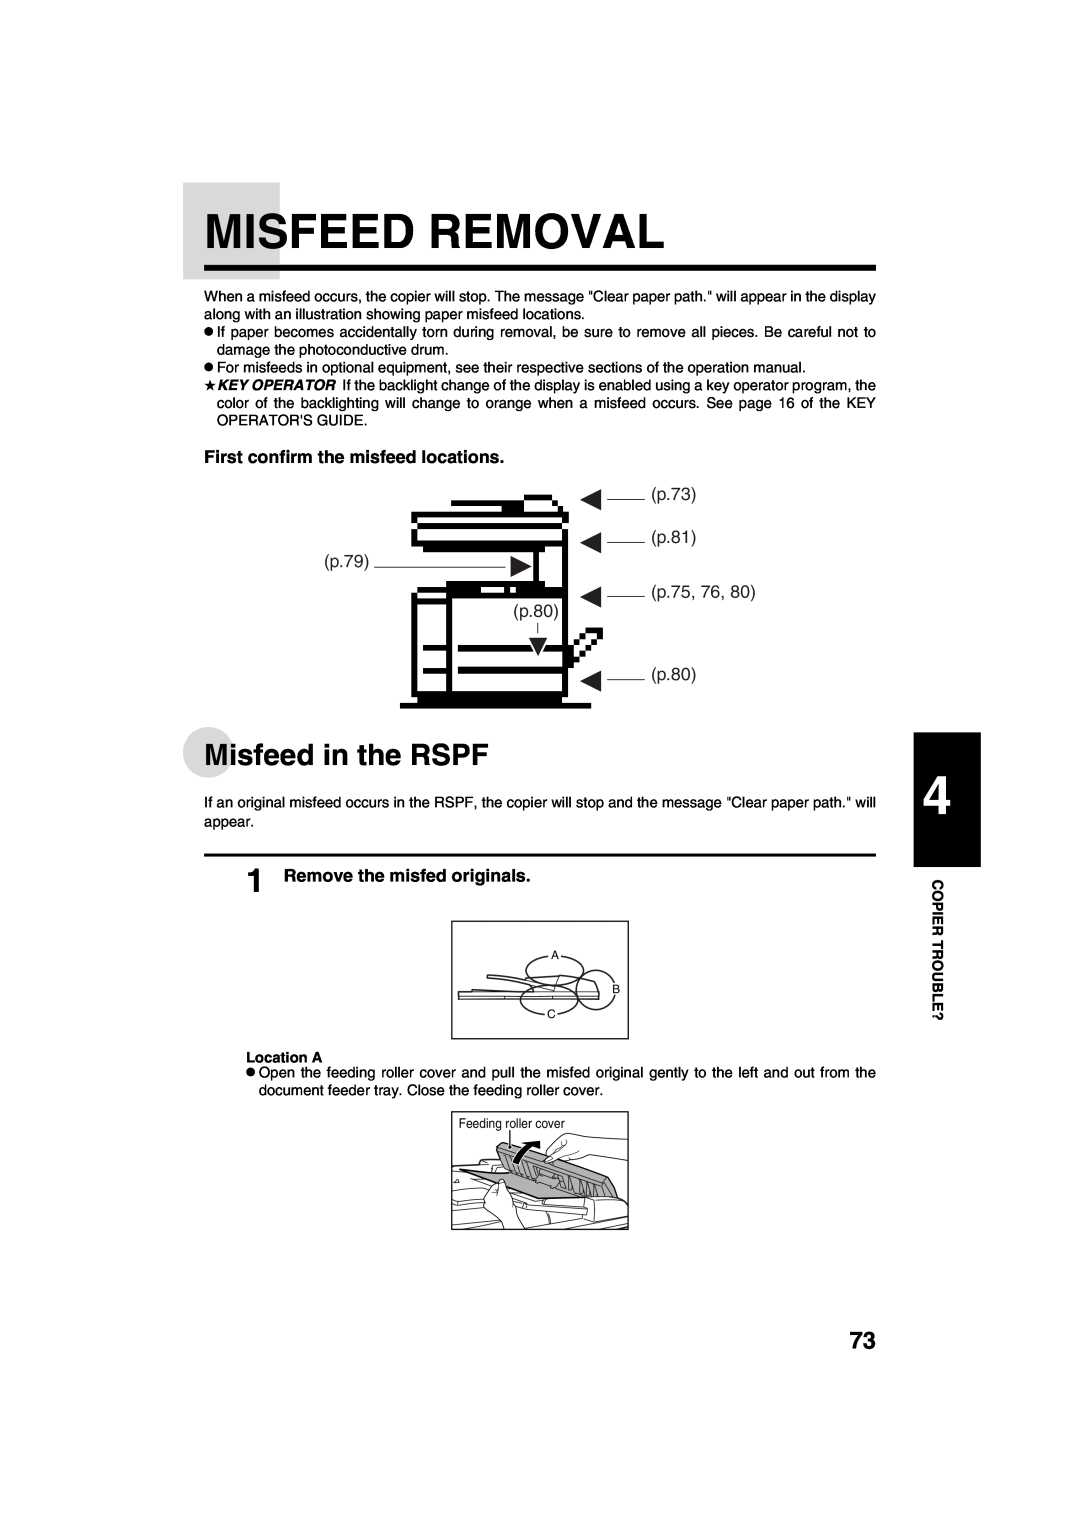 Sharp AR-M208 Misfeed Removal, Misfeed in the RSPF, First confirm the misfeed locations, Remove the misfed originals 